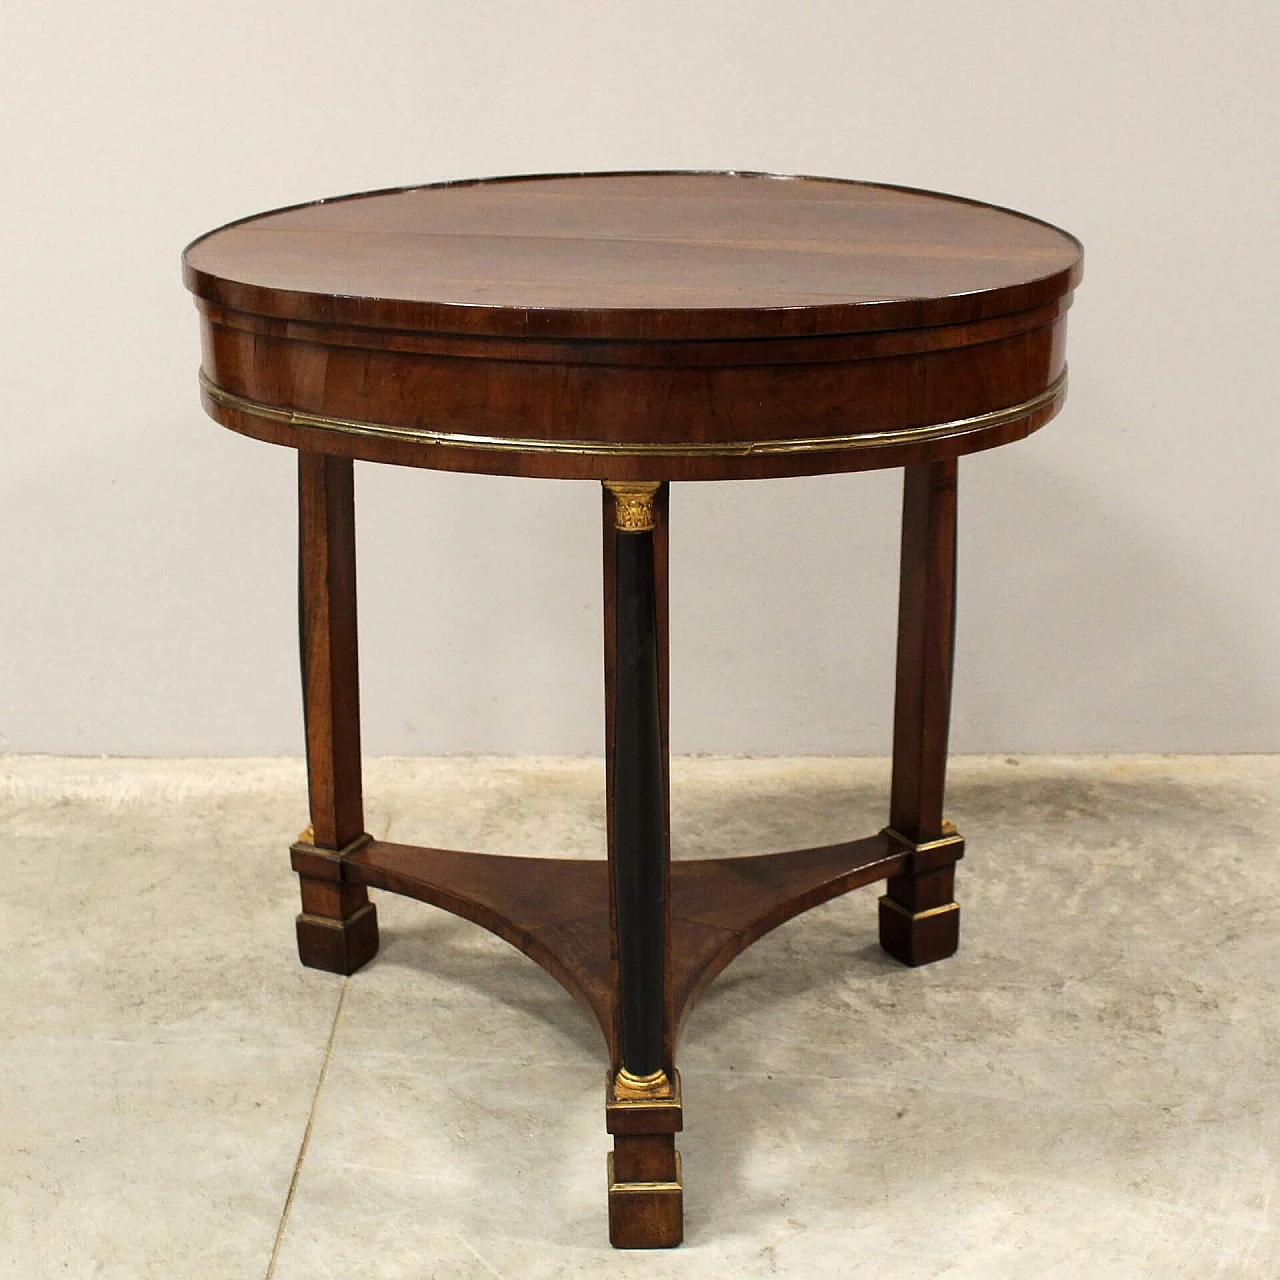 Empire coffee table in solid walnut and walnut veneer, early 19th century 1